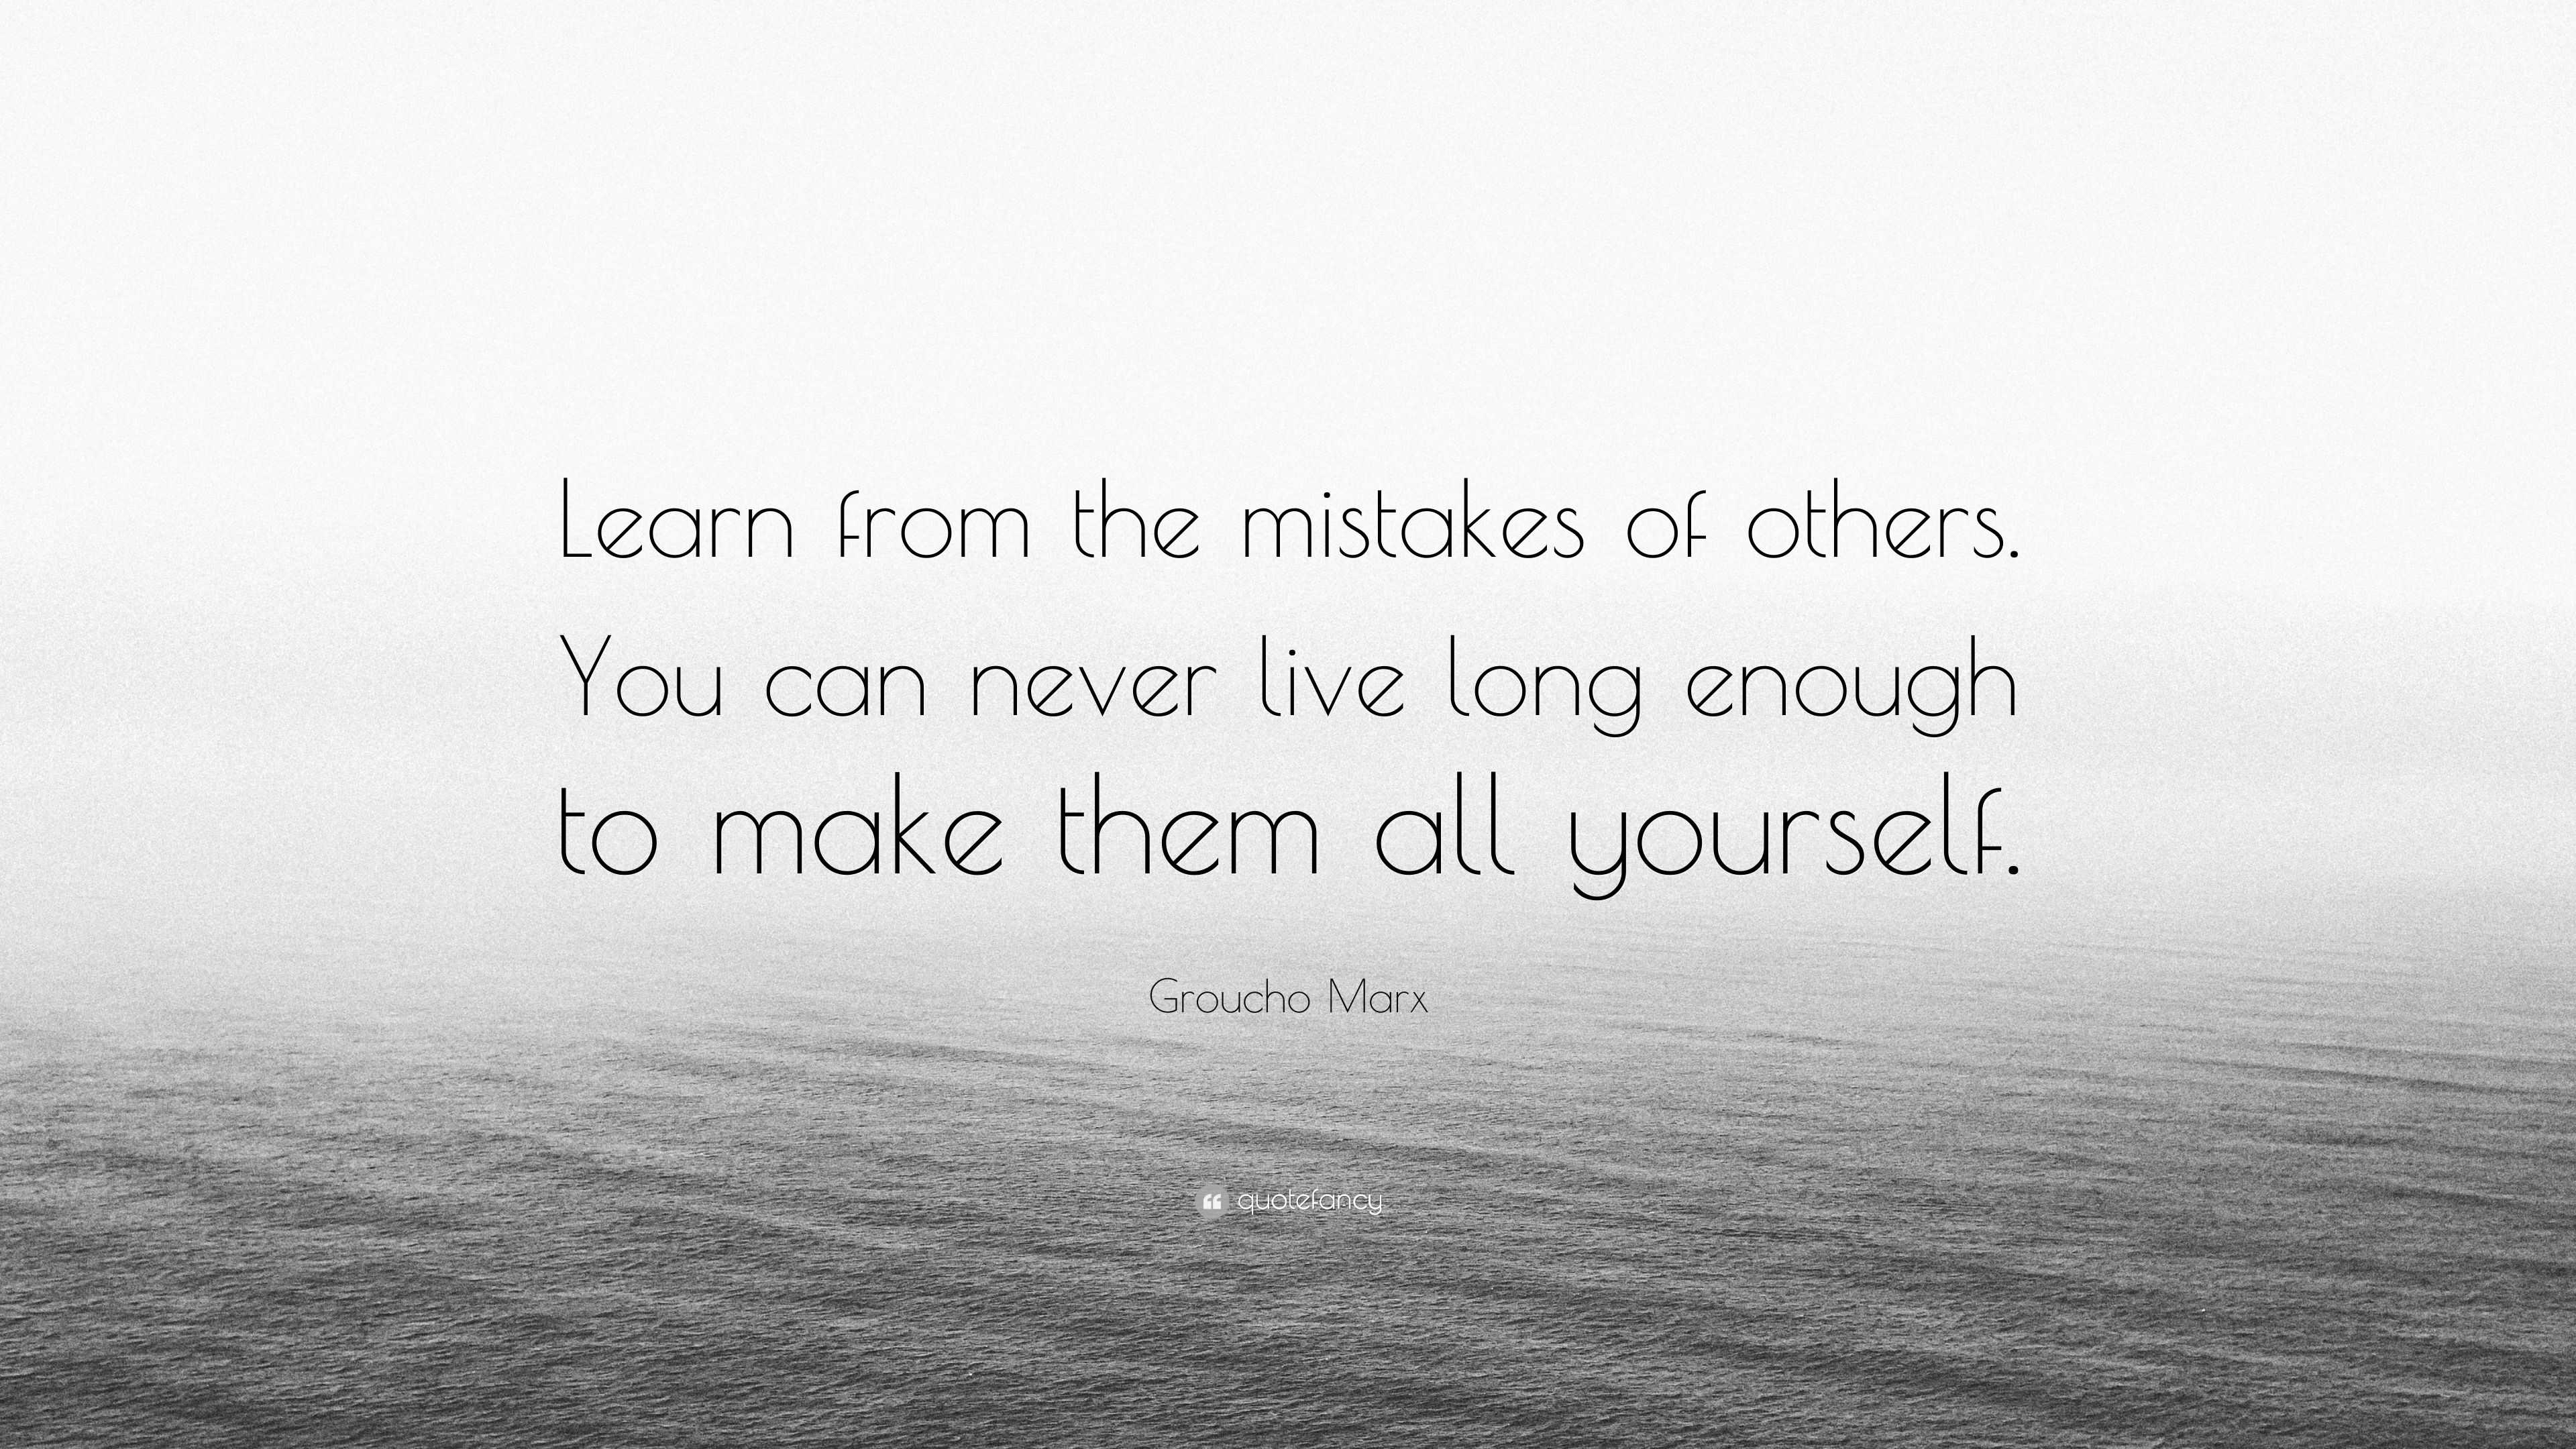 Groucho Marx Quote: “Learn from the mistakes of others. You can never ...